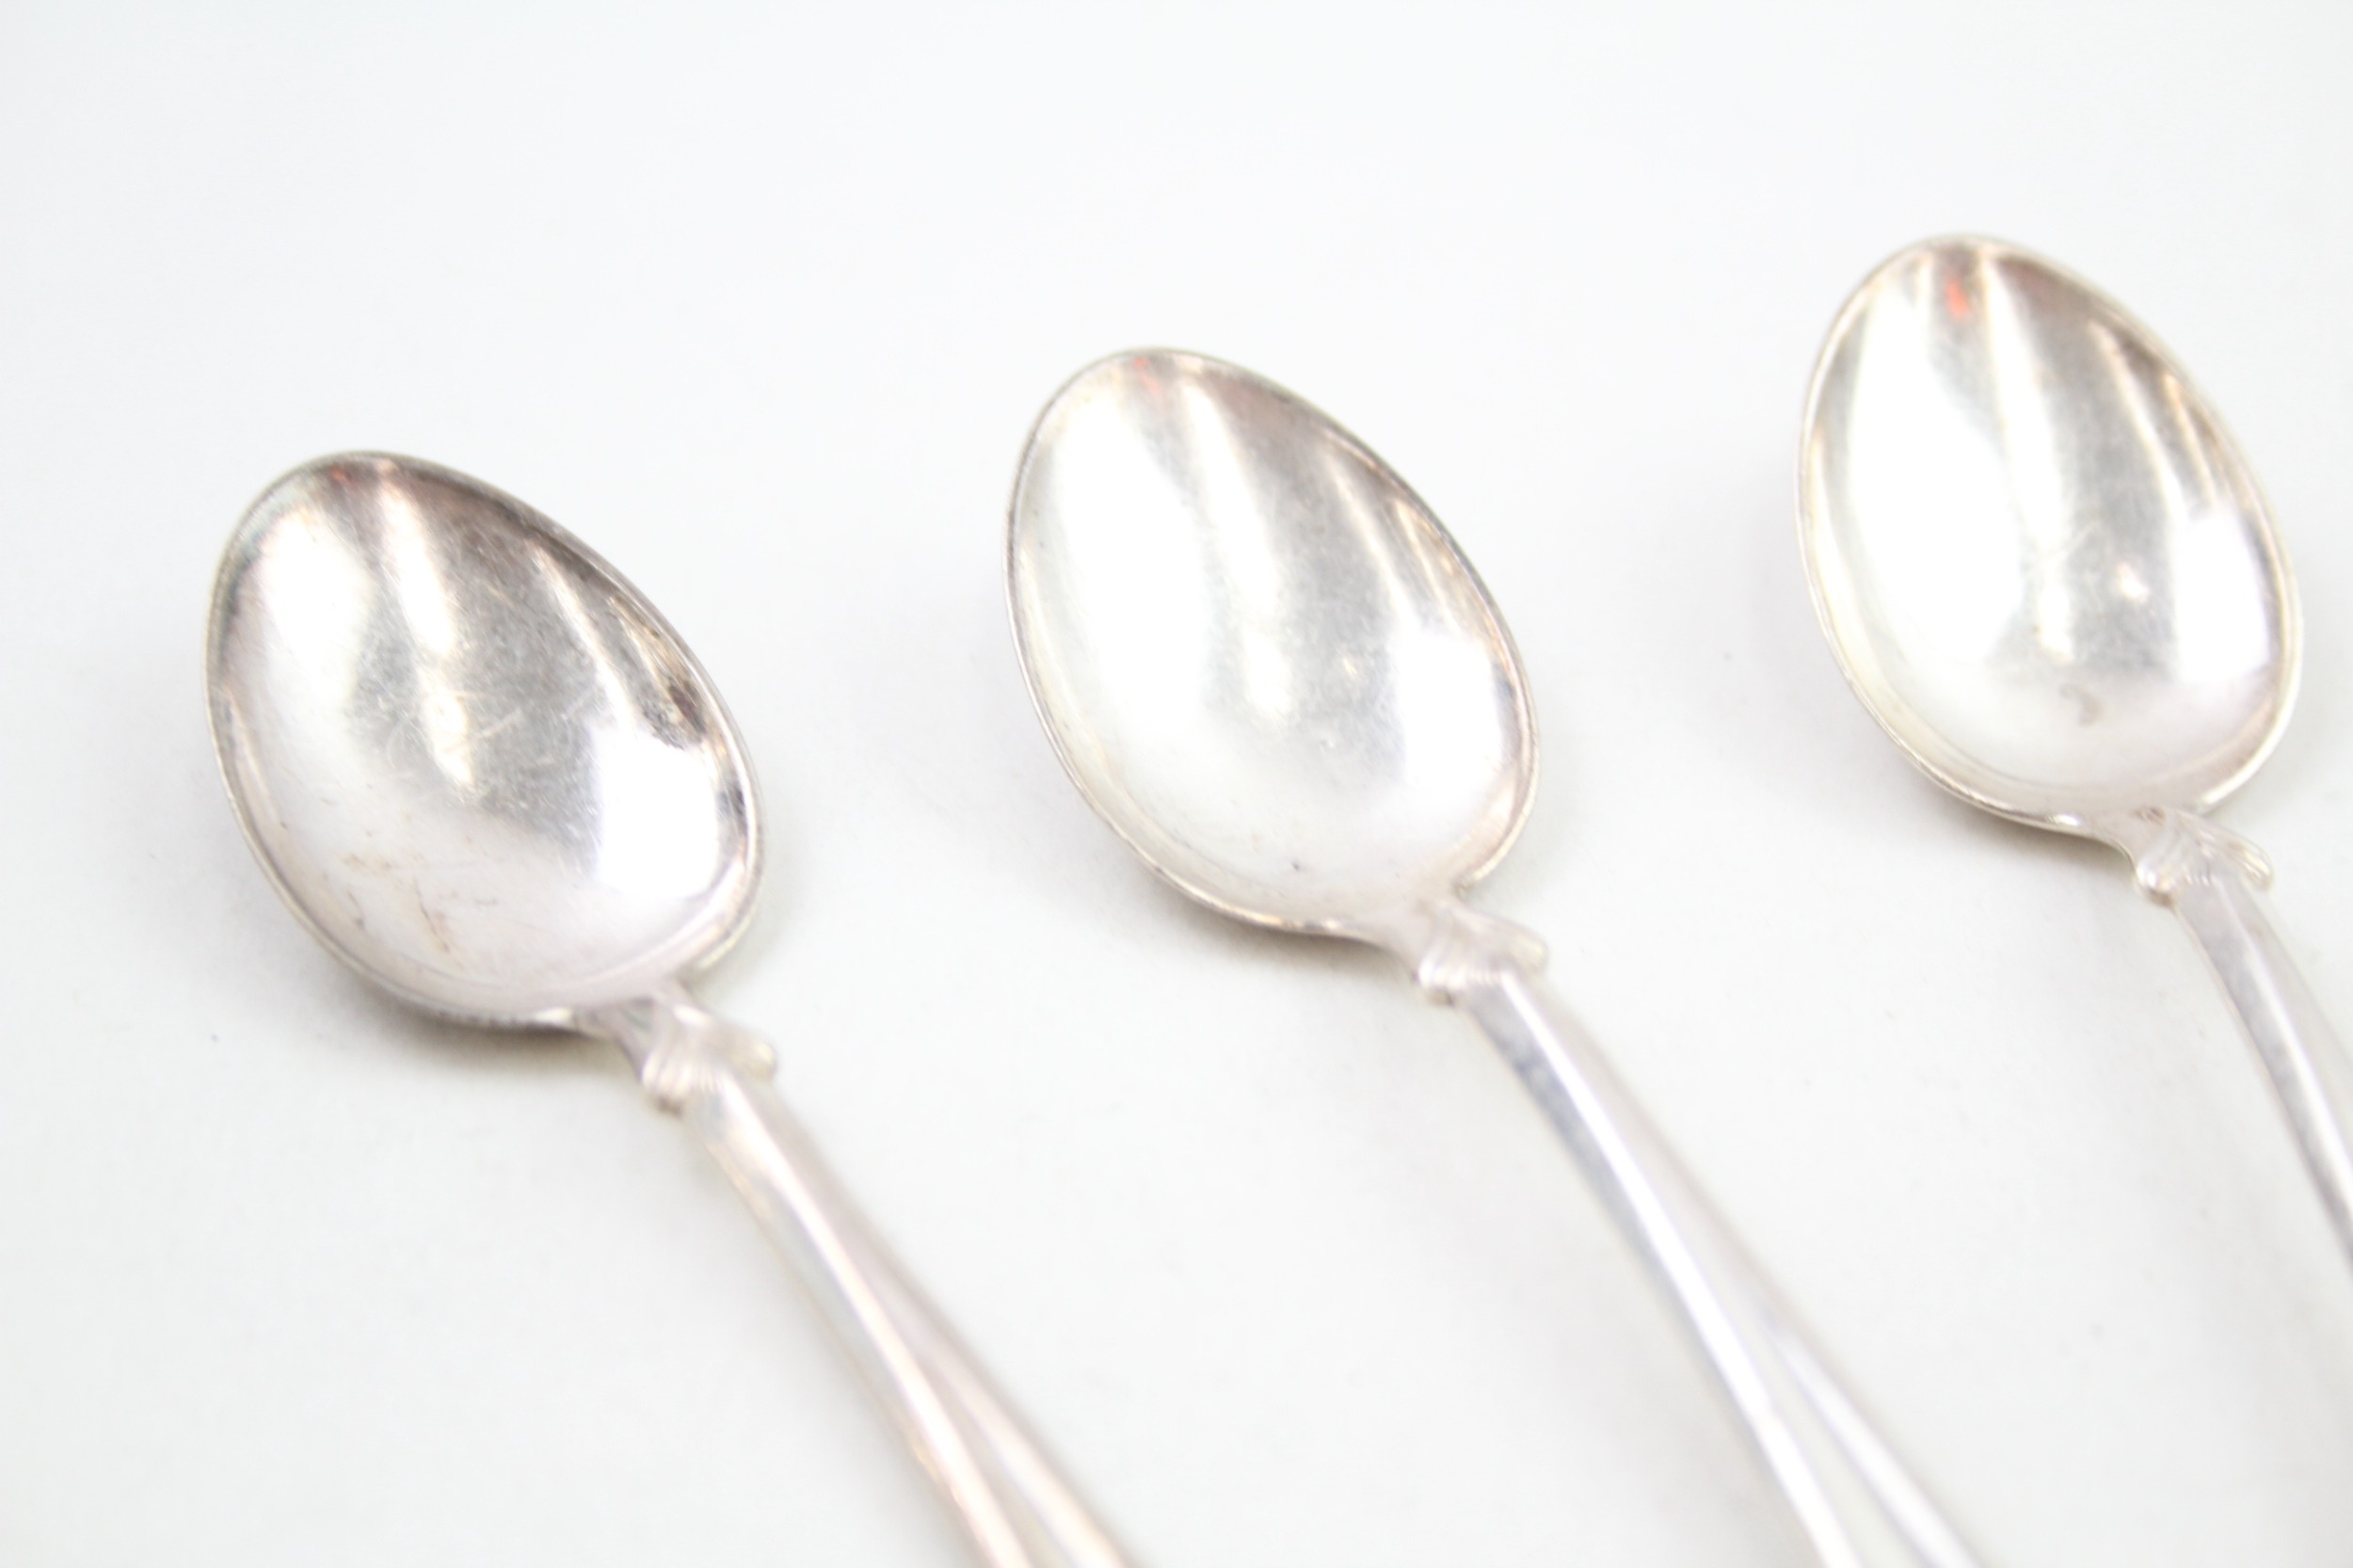 5 x .830 norway silver teaspoons maker marked NW - Image 2 of 6